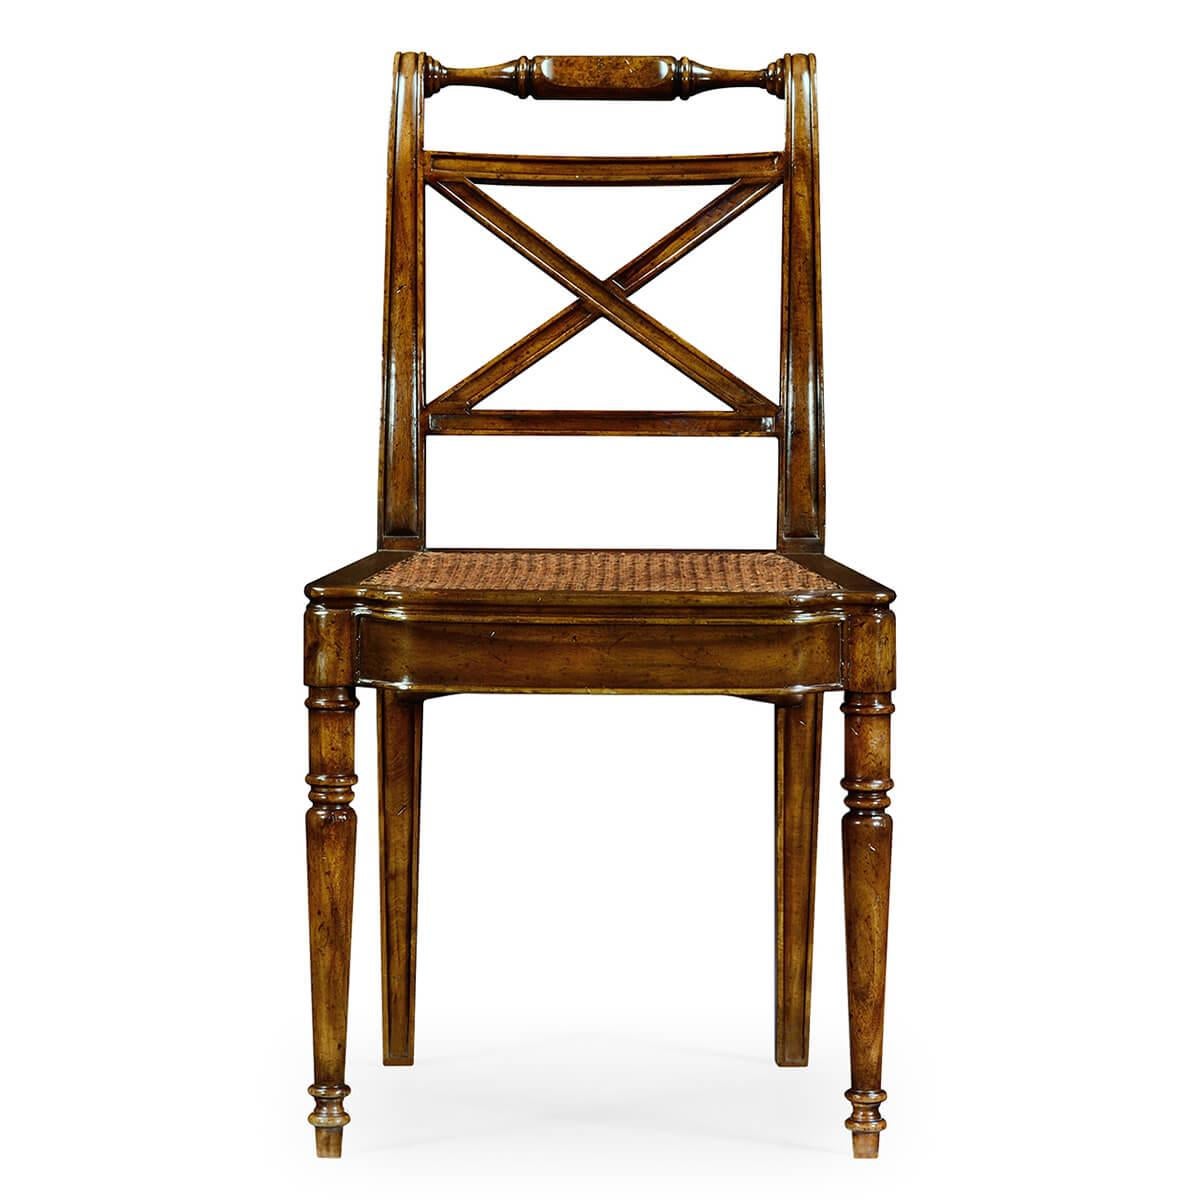 Late Regency style walnut side chair, the shaped bar top rail above an X-frame back, caned seat and paneled break fronted rail and turned straight legs. A Classic design of the early 19th century.

Dimensions: 20.5